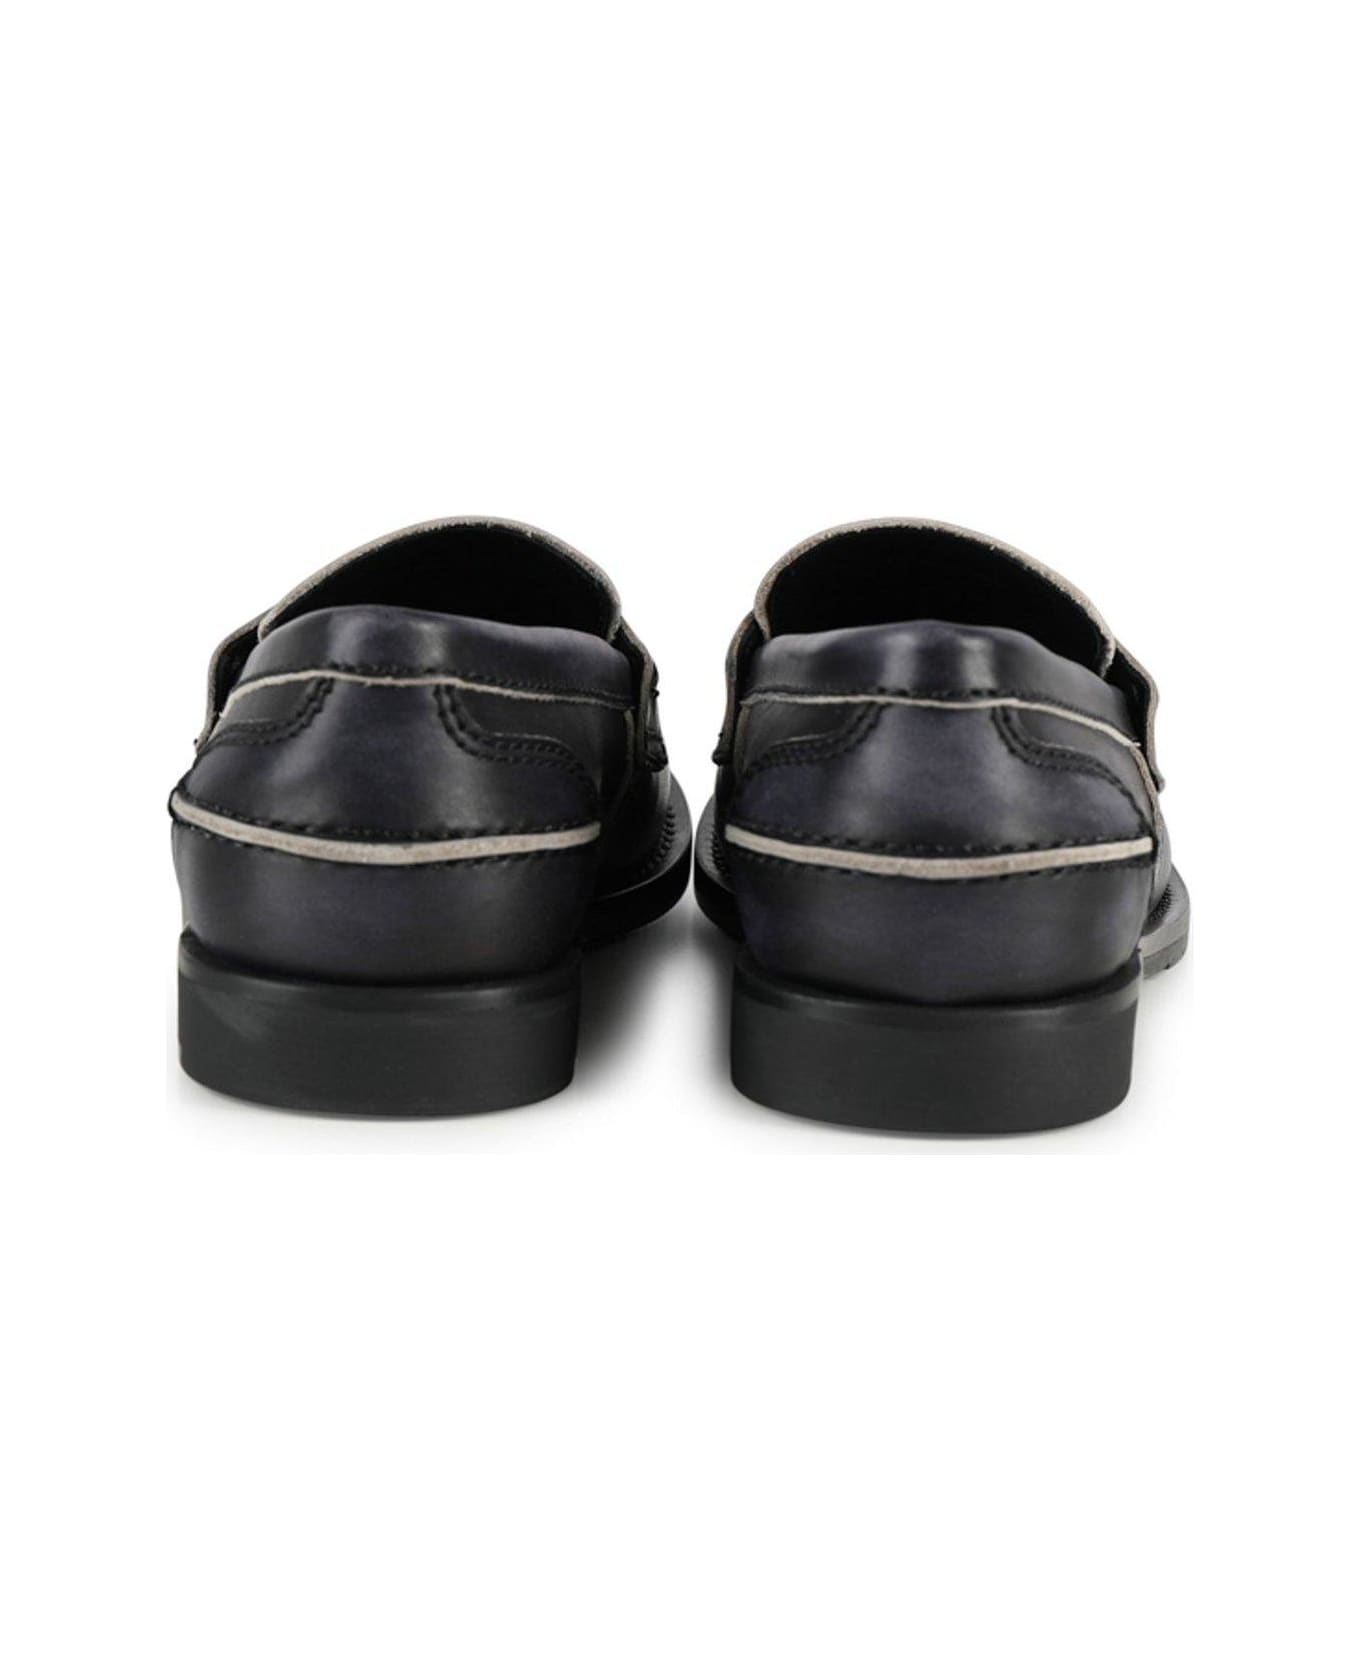 Miu Miu Coin Plaque Slip-on Loafers